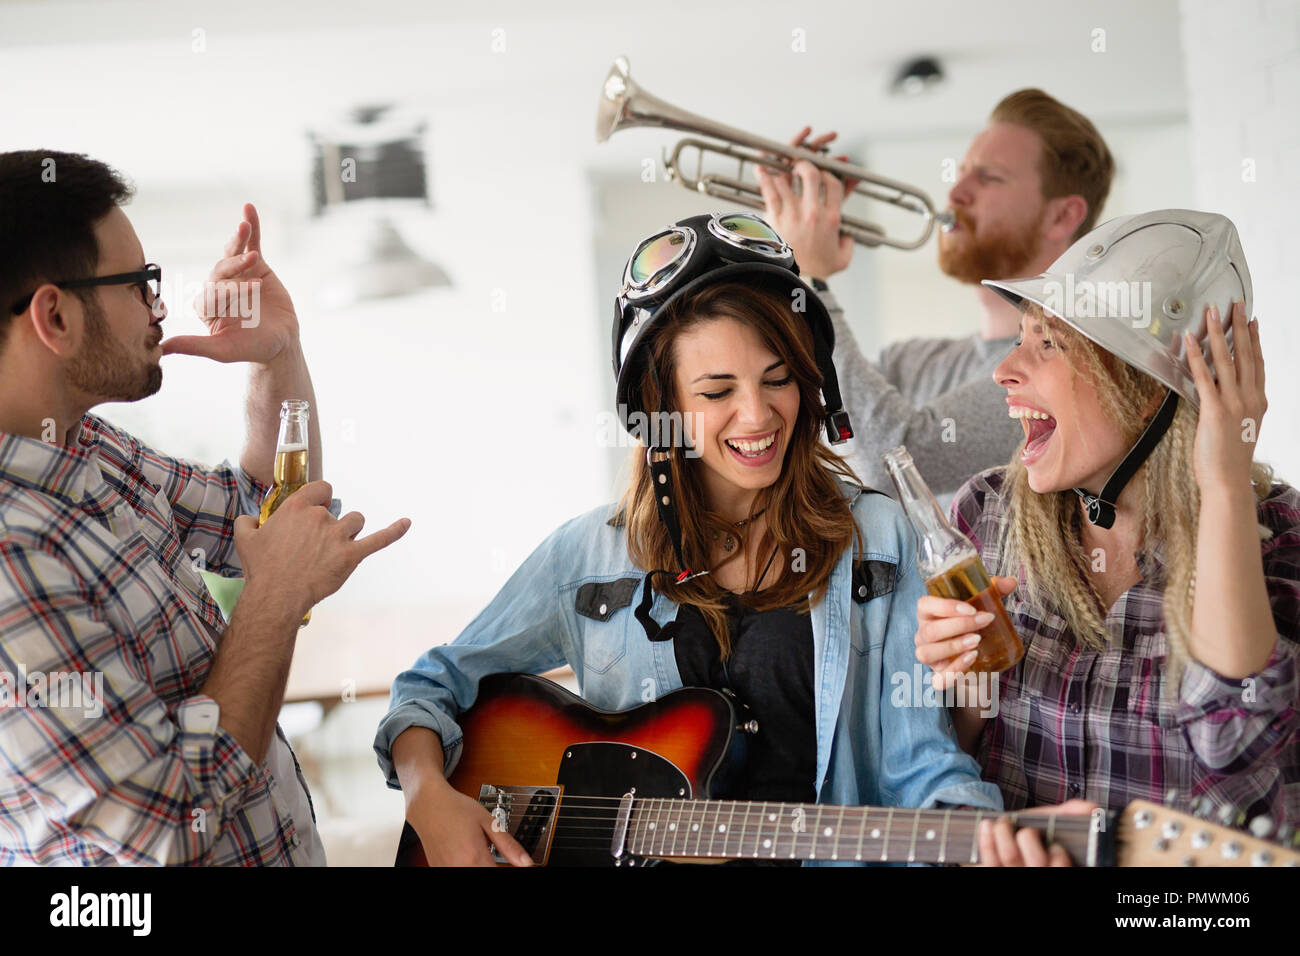 Friends having fun and partying in house and playing music Stock Photo